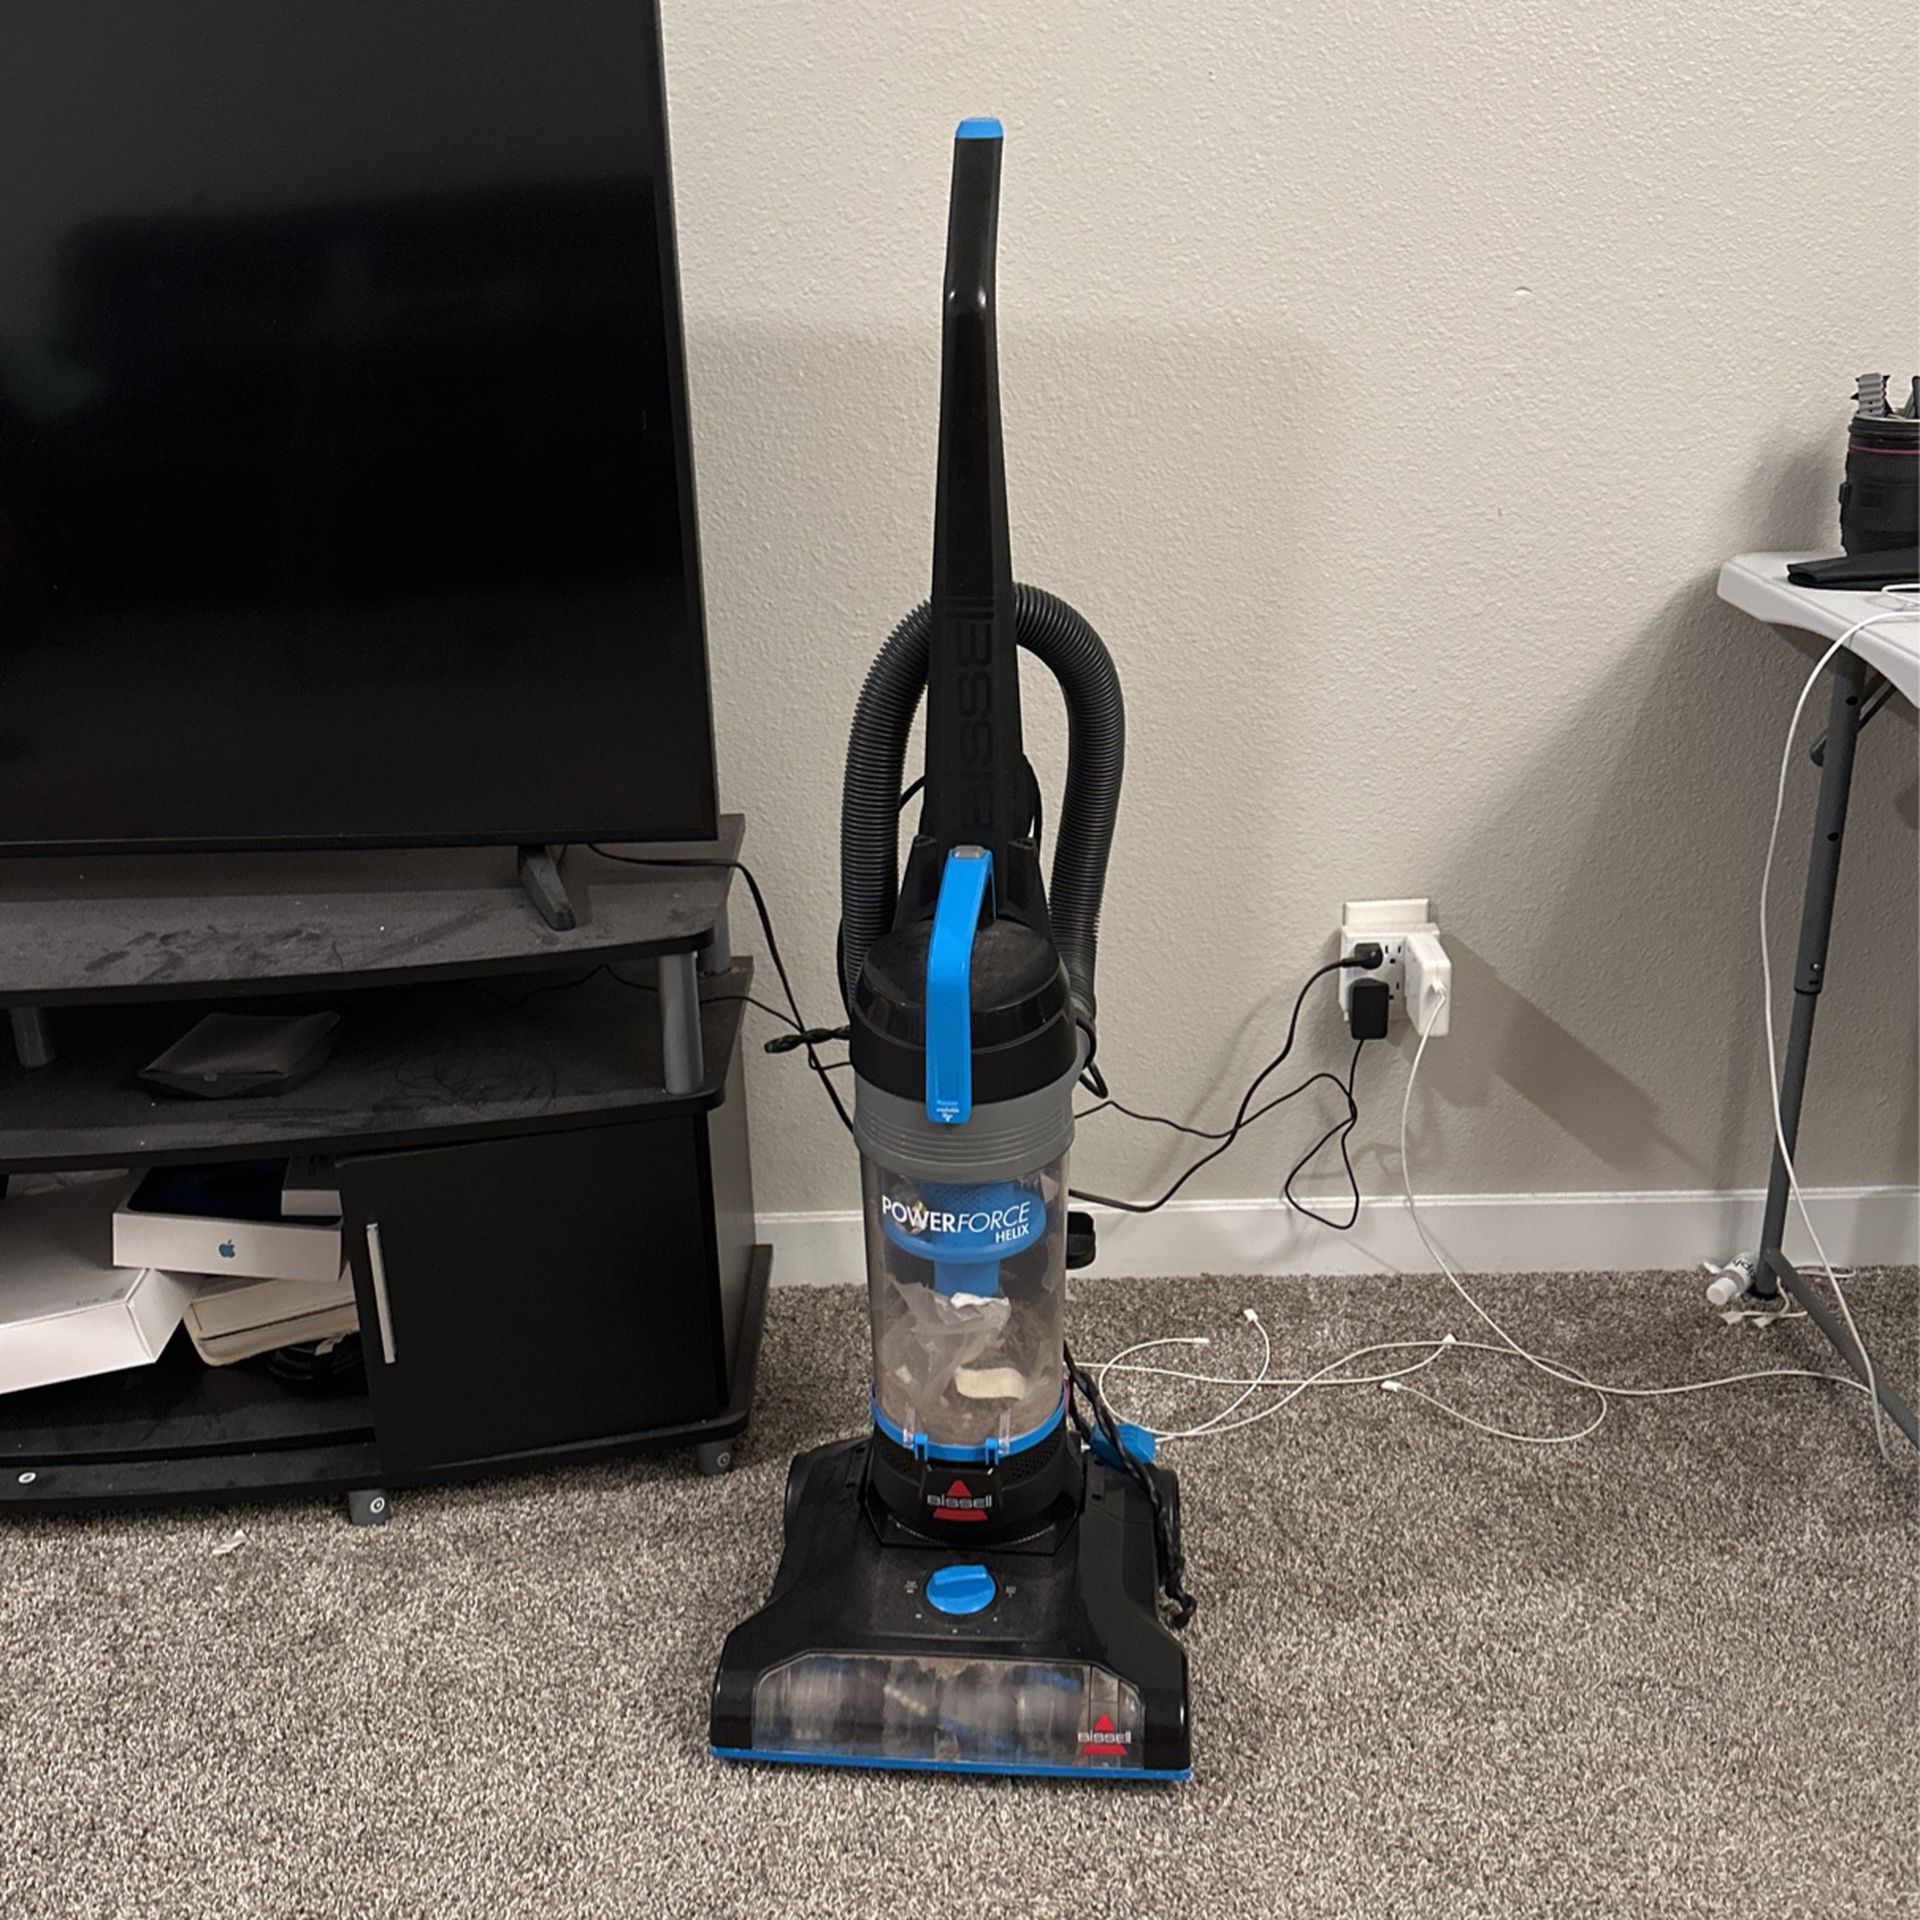 Bissel Power Force vacuum Cleaner - MOVE OUT SALE